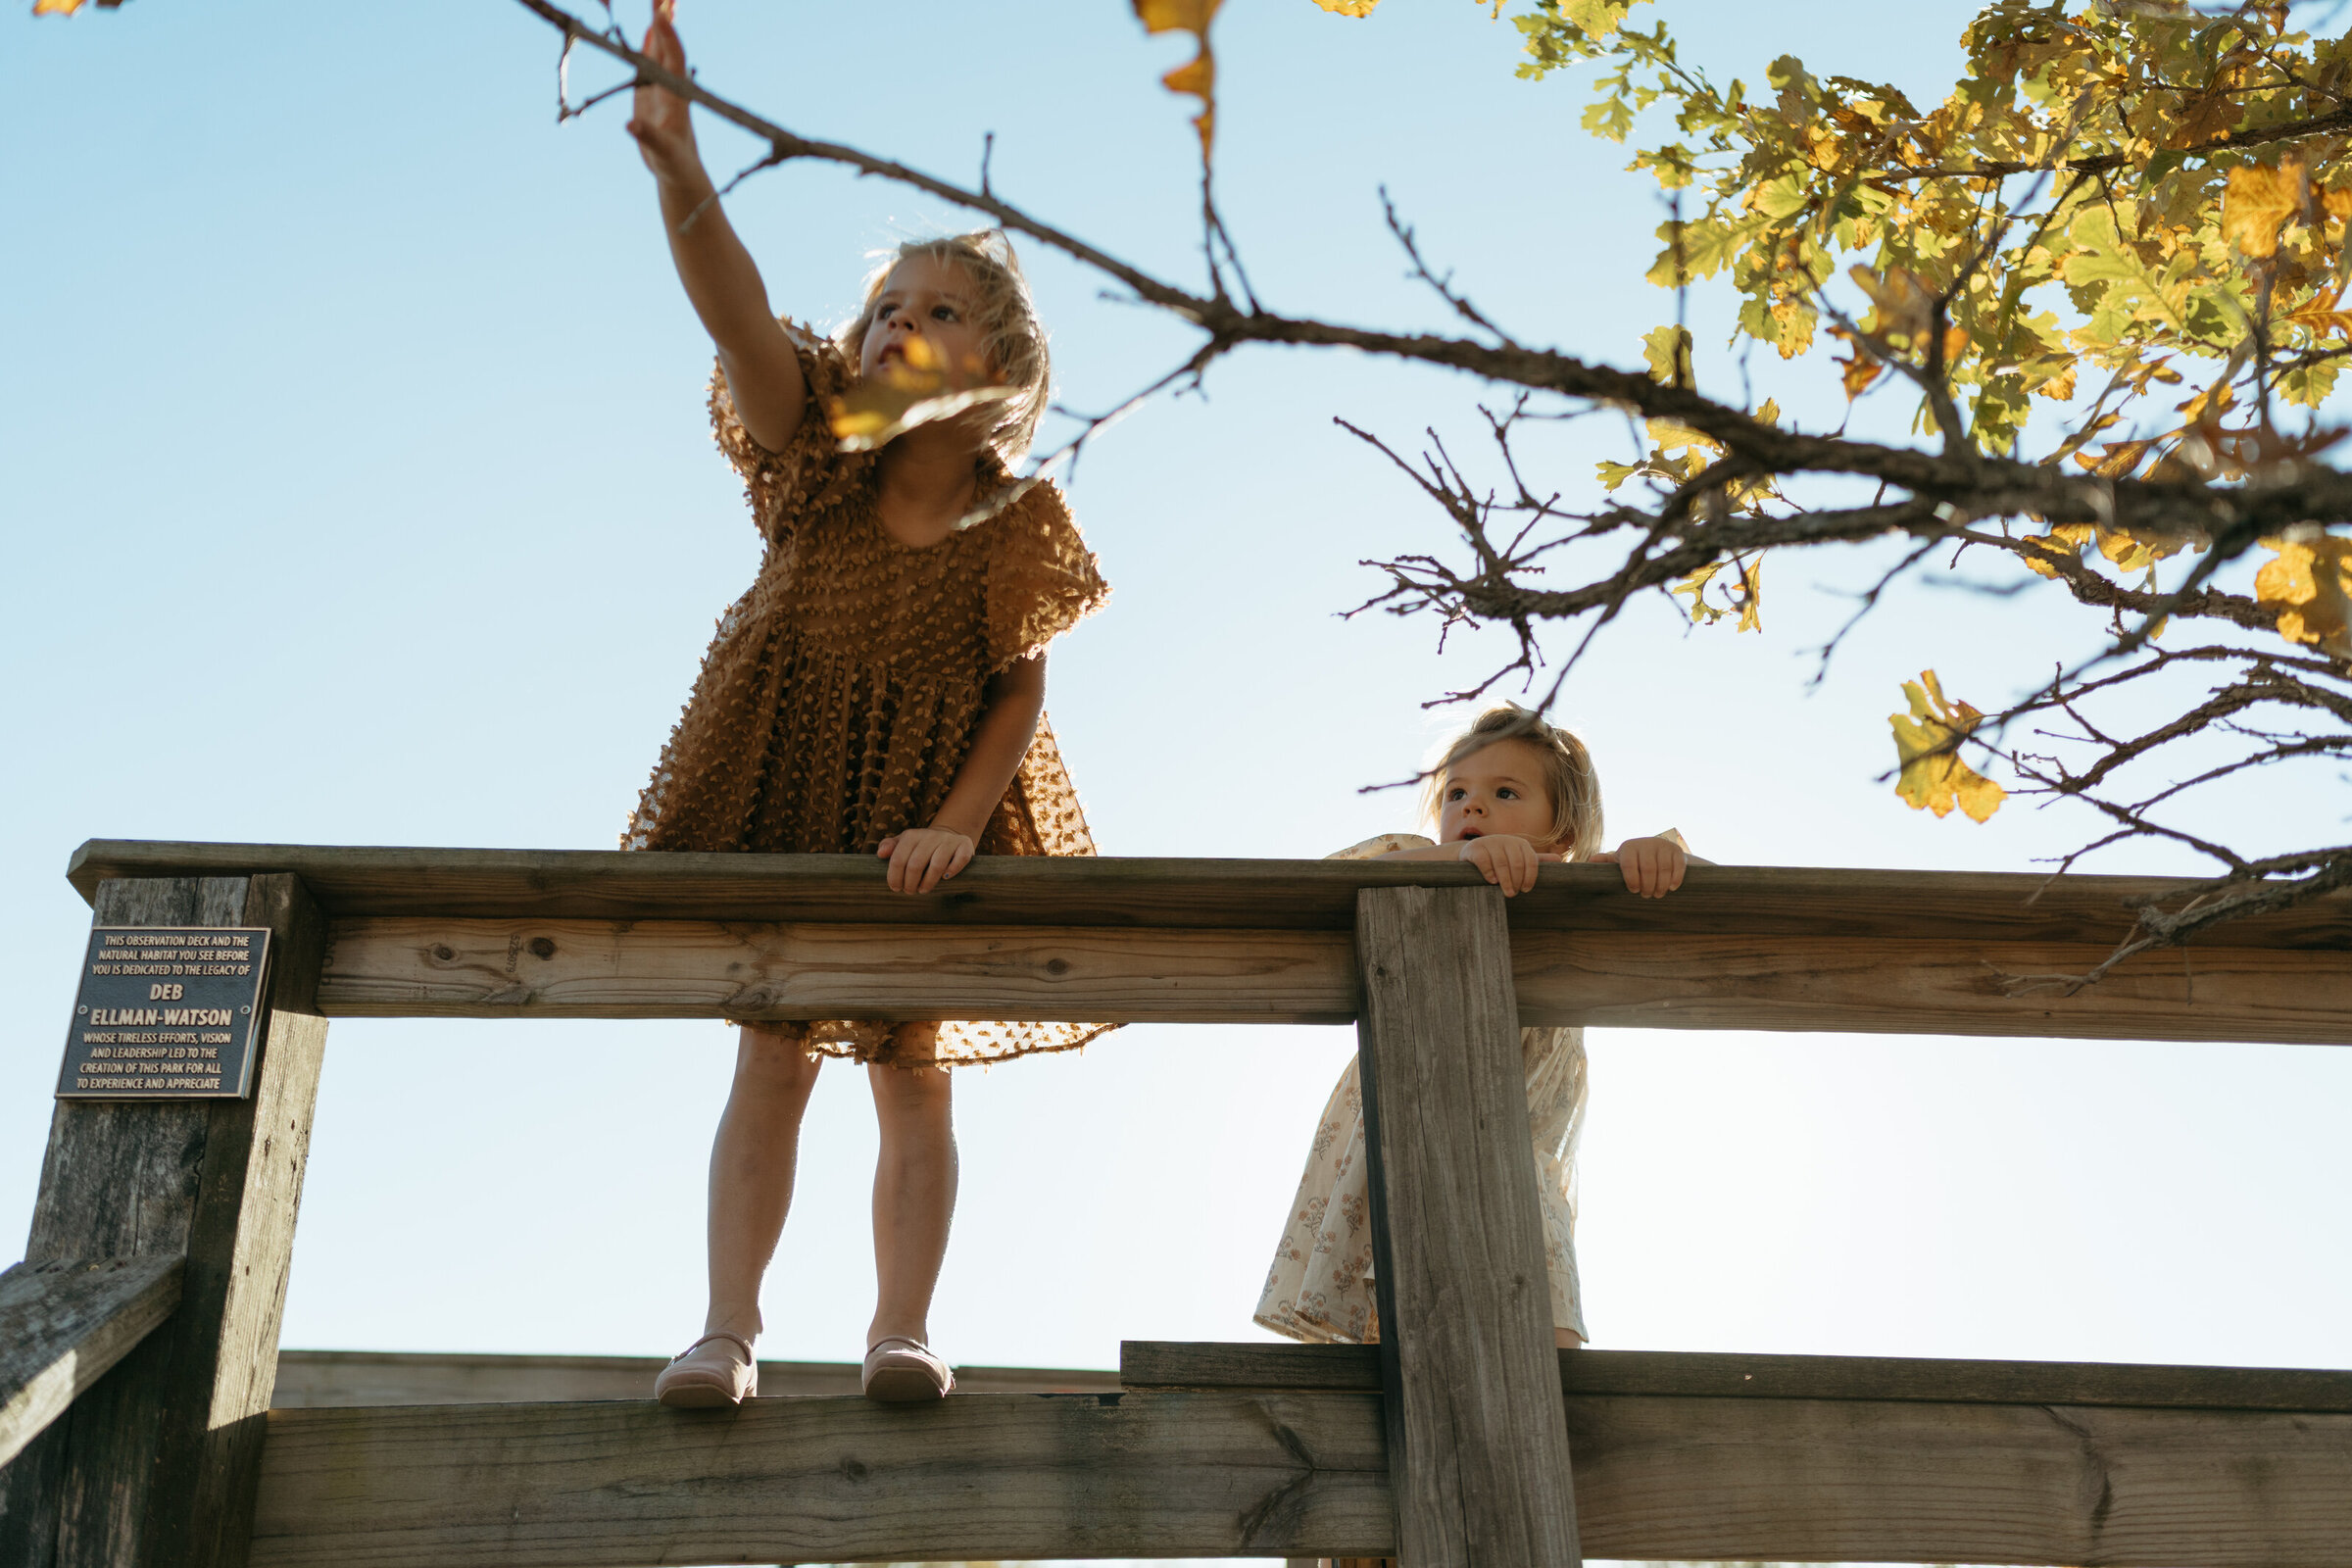 Two young sisters wearing fancy dresses reach from a deck for a tree branch at Daubenspeck nature Park